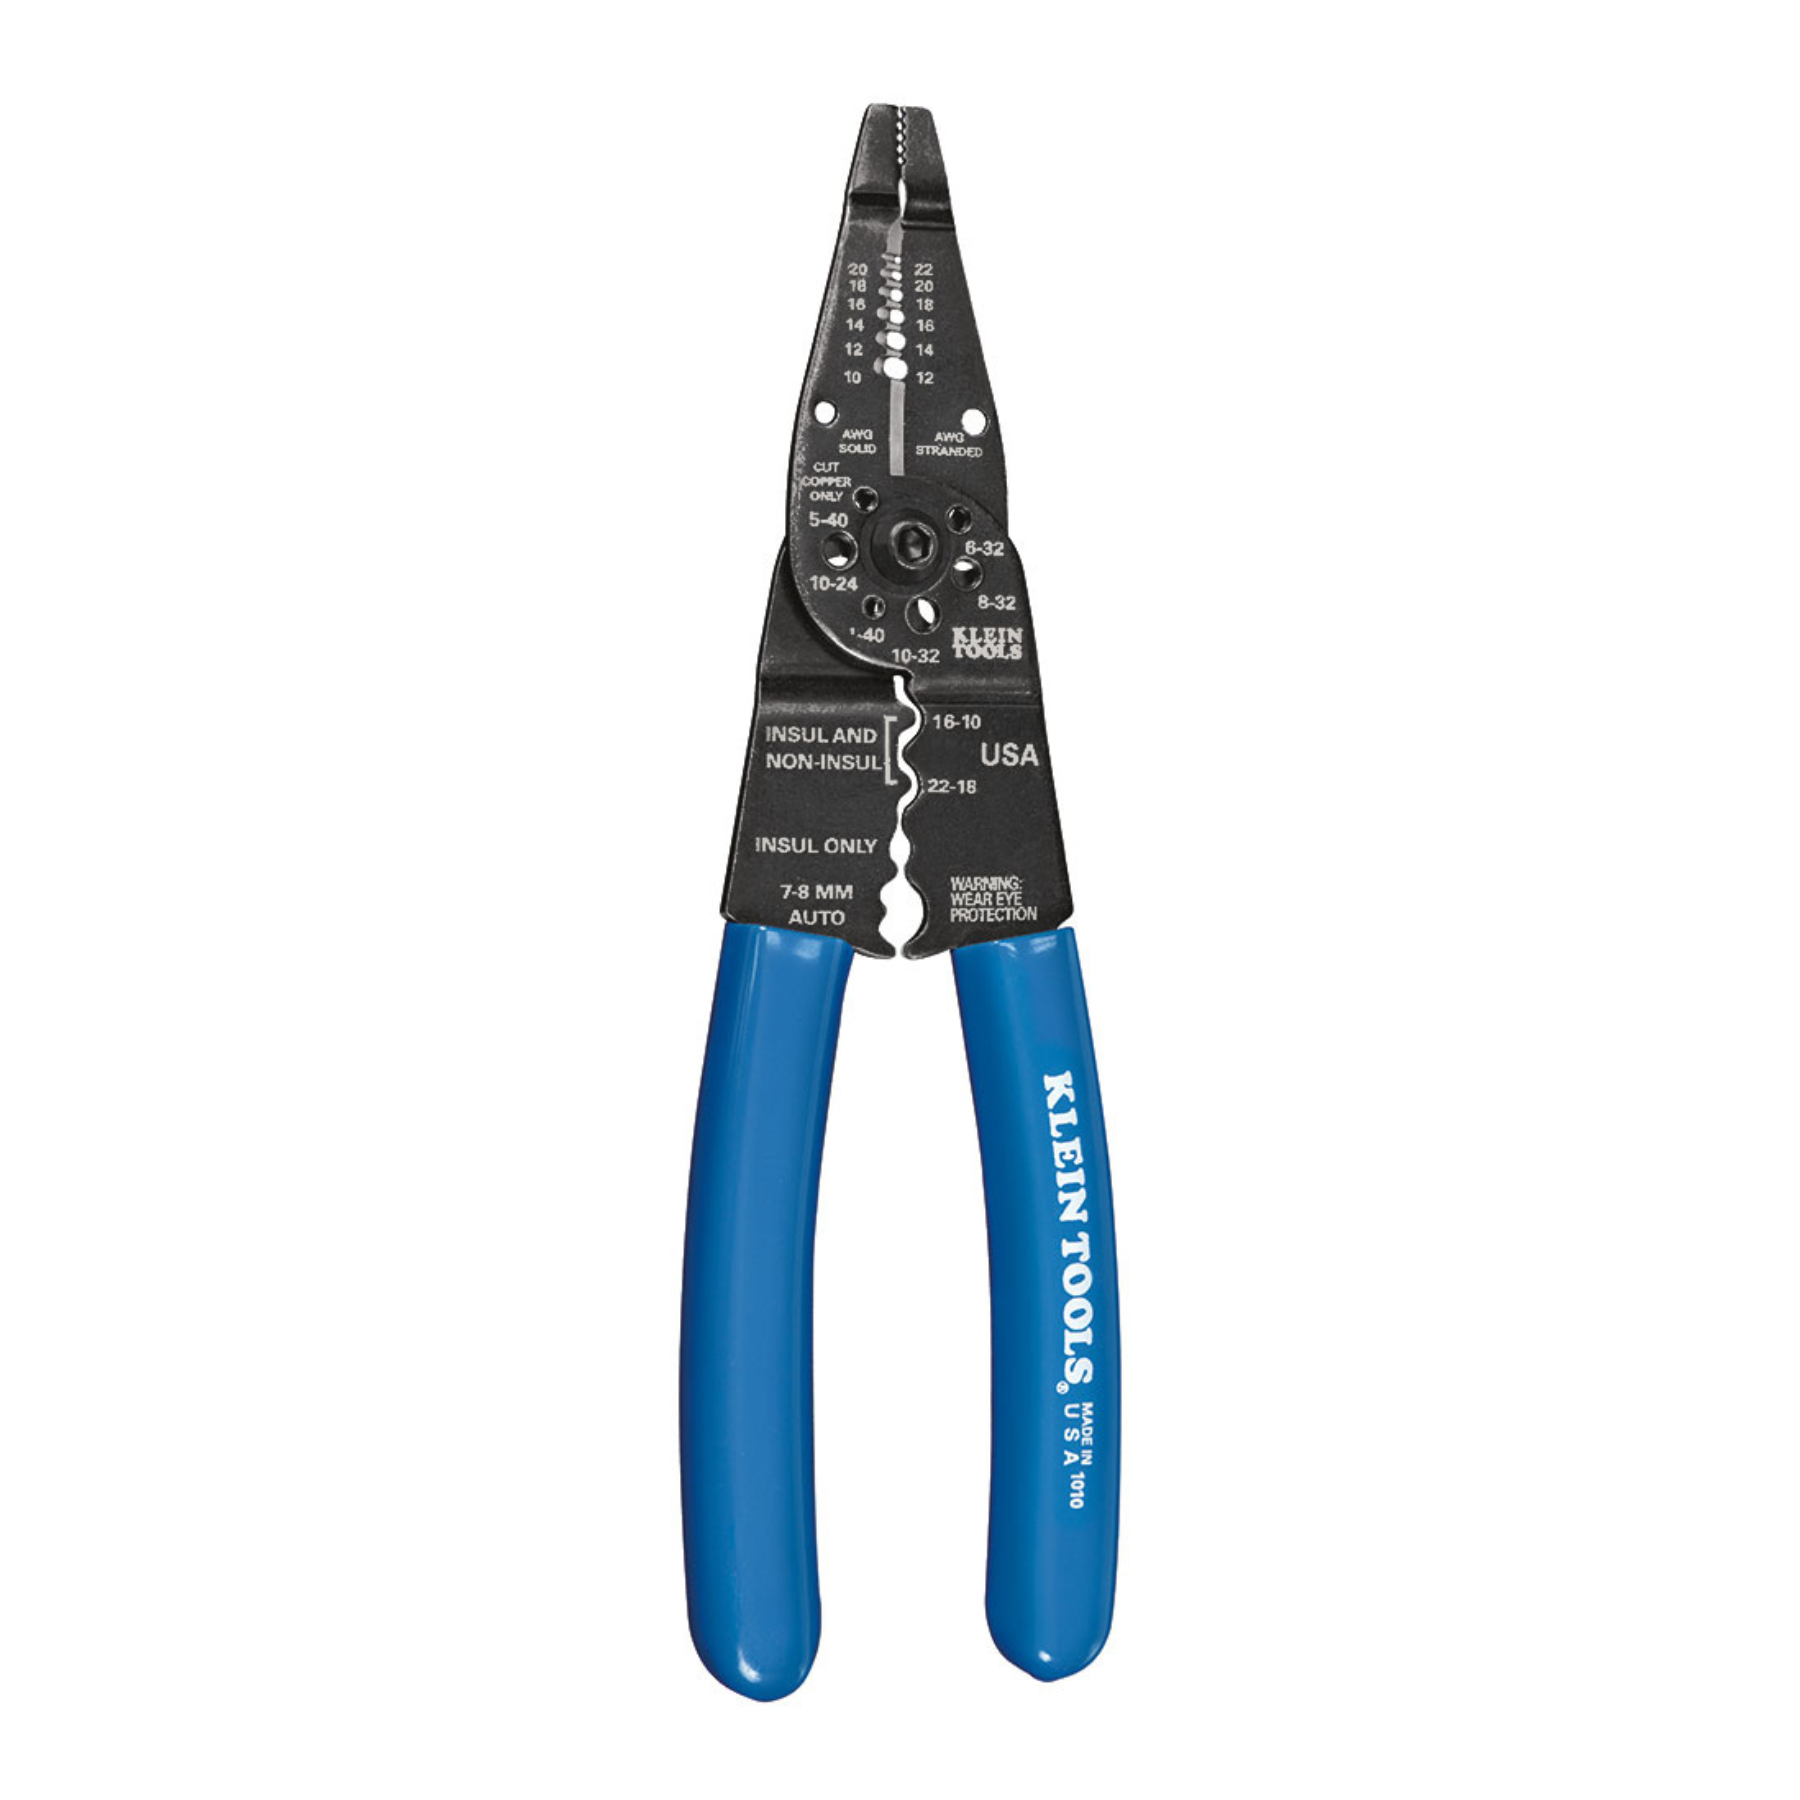 The Klein Tools Wire Stripper Long Nose Multi Tool handles a wide range of functions, from wire and bolt cutting to stripping and crimping. The cutting and stripping holes are positioned in front of the pivot to easily fit into tight spaces. Plastic-covered cushioned handles make this tool comfortable to use.